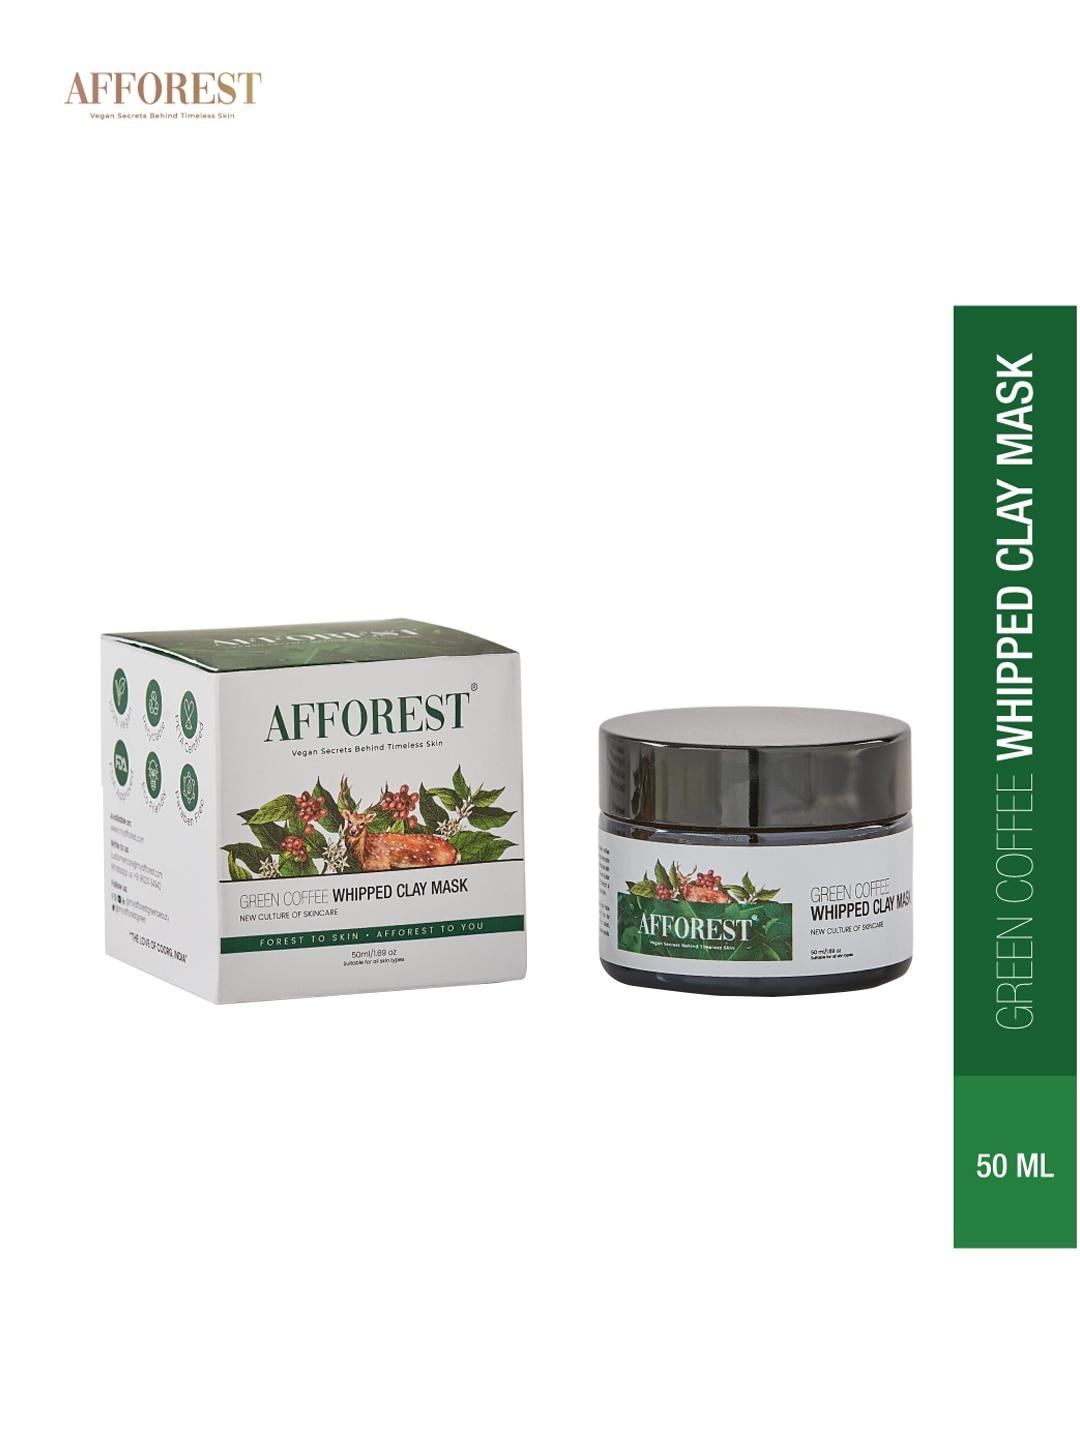 afforest green coffee whipped clay mask 50ml